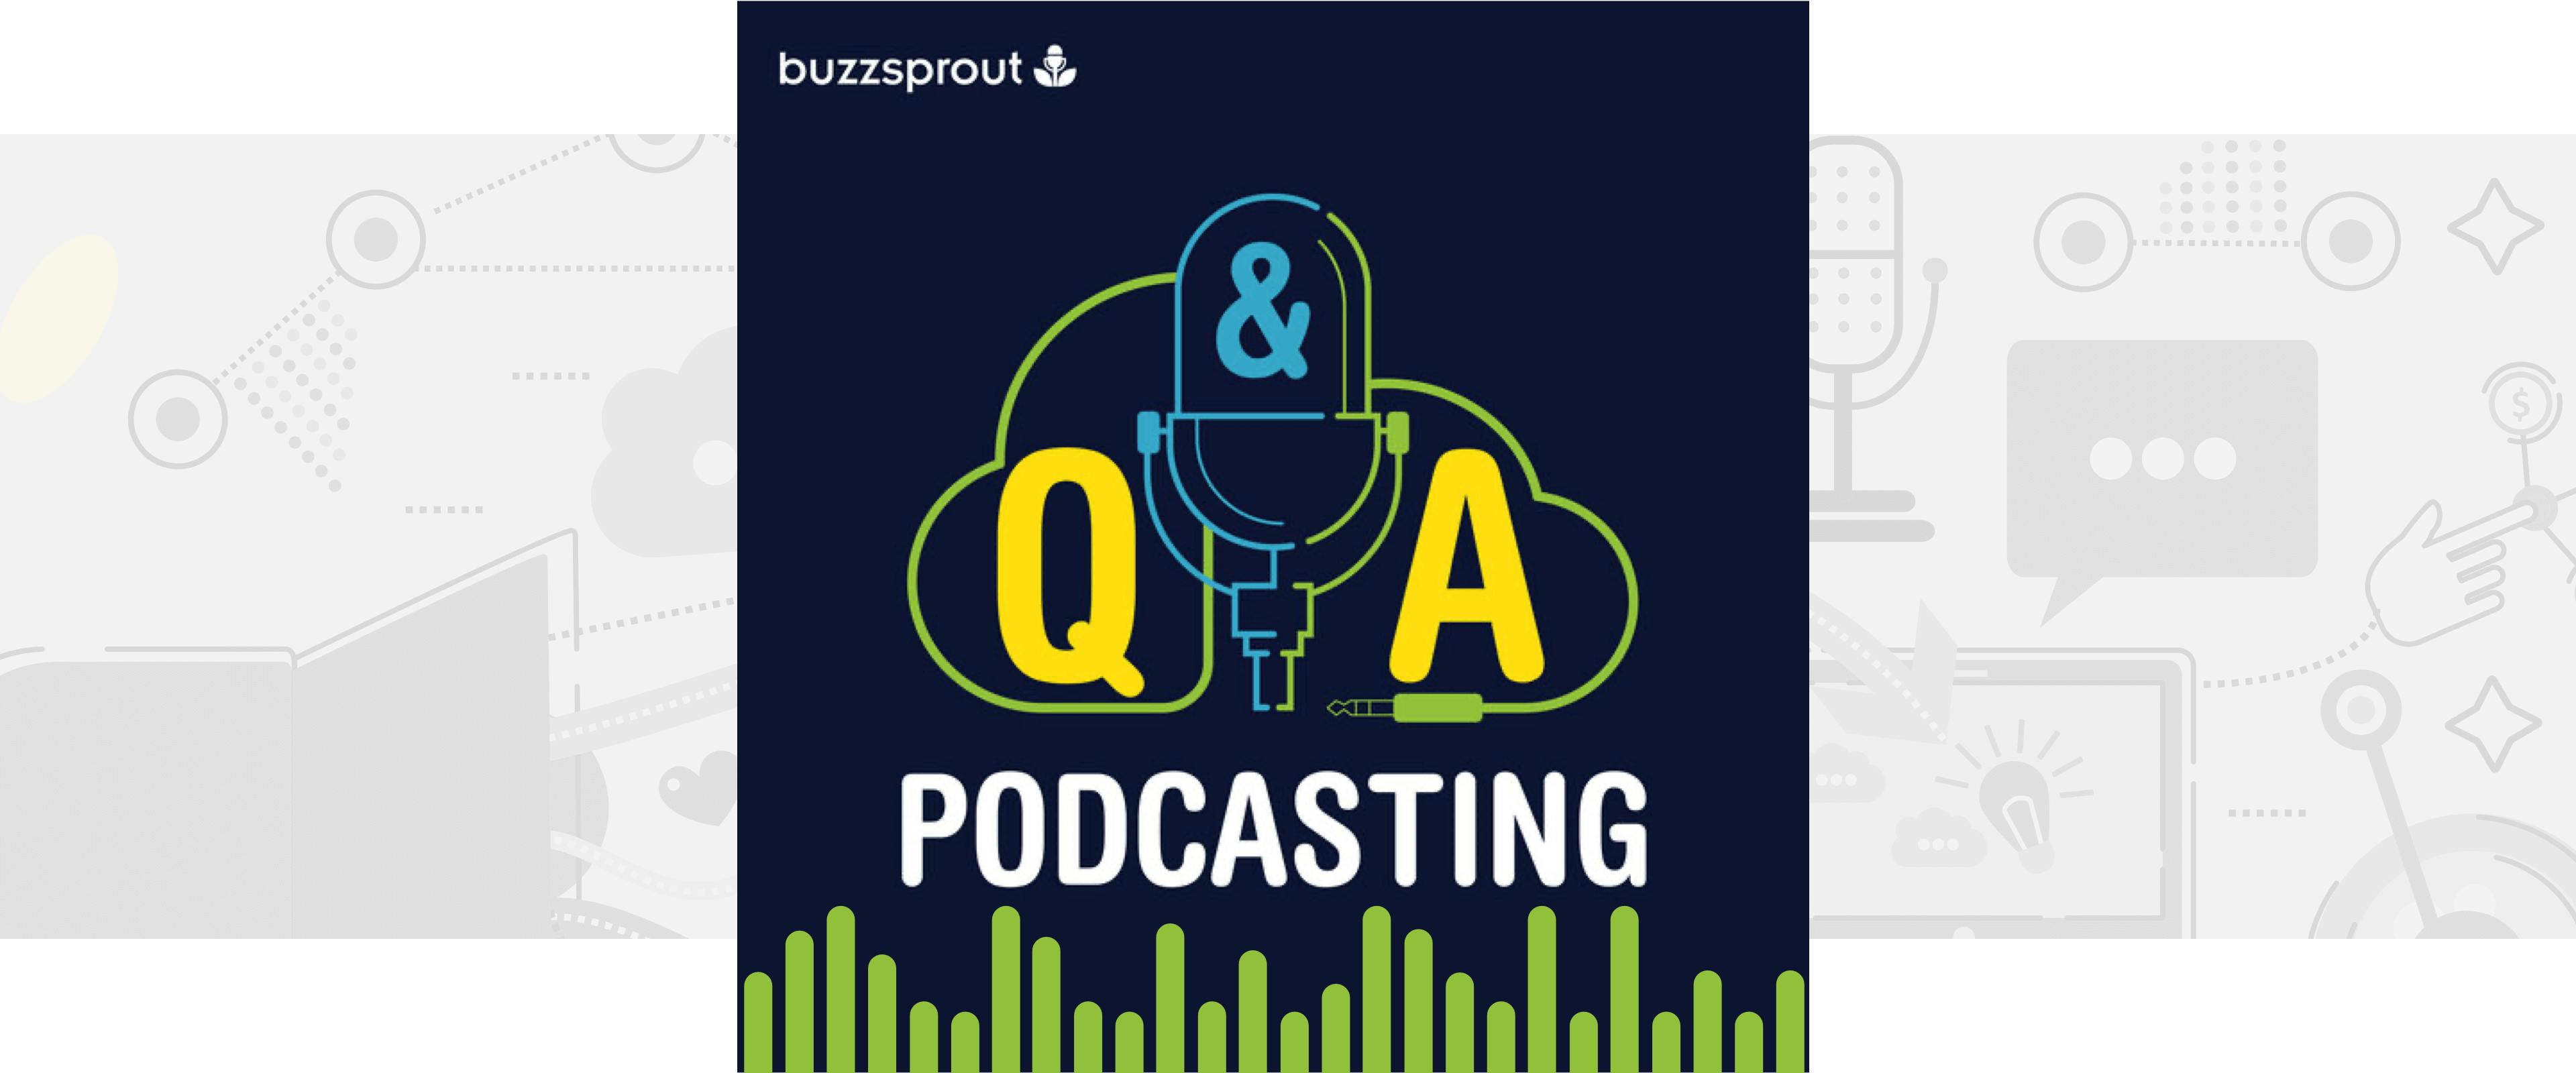 Podcasting Q&A podcast audiogram with green waveform 